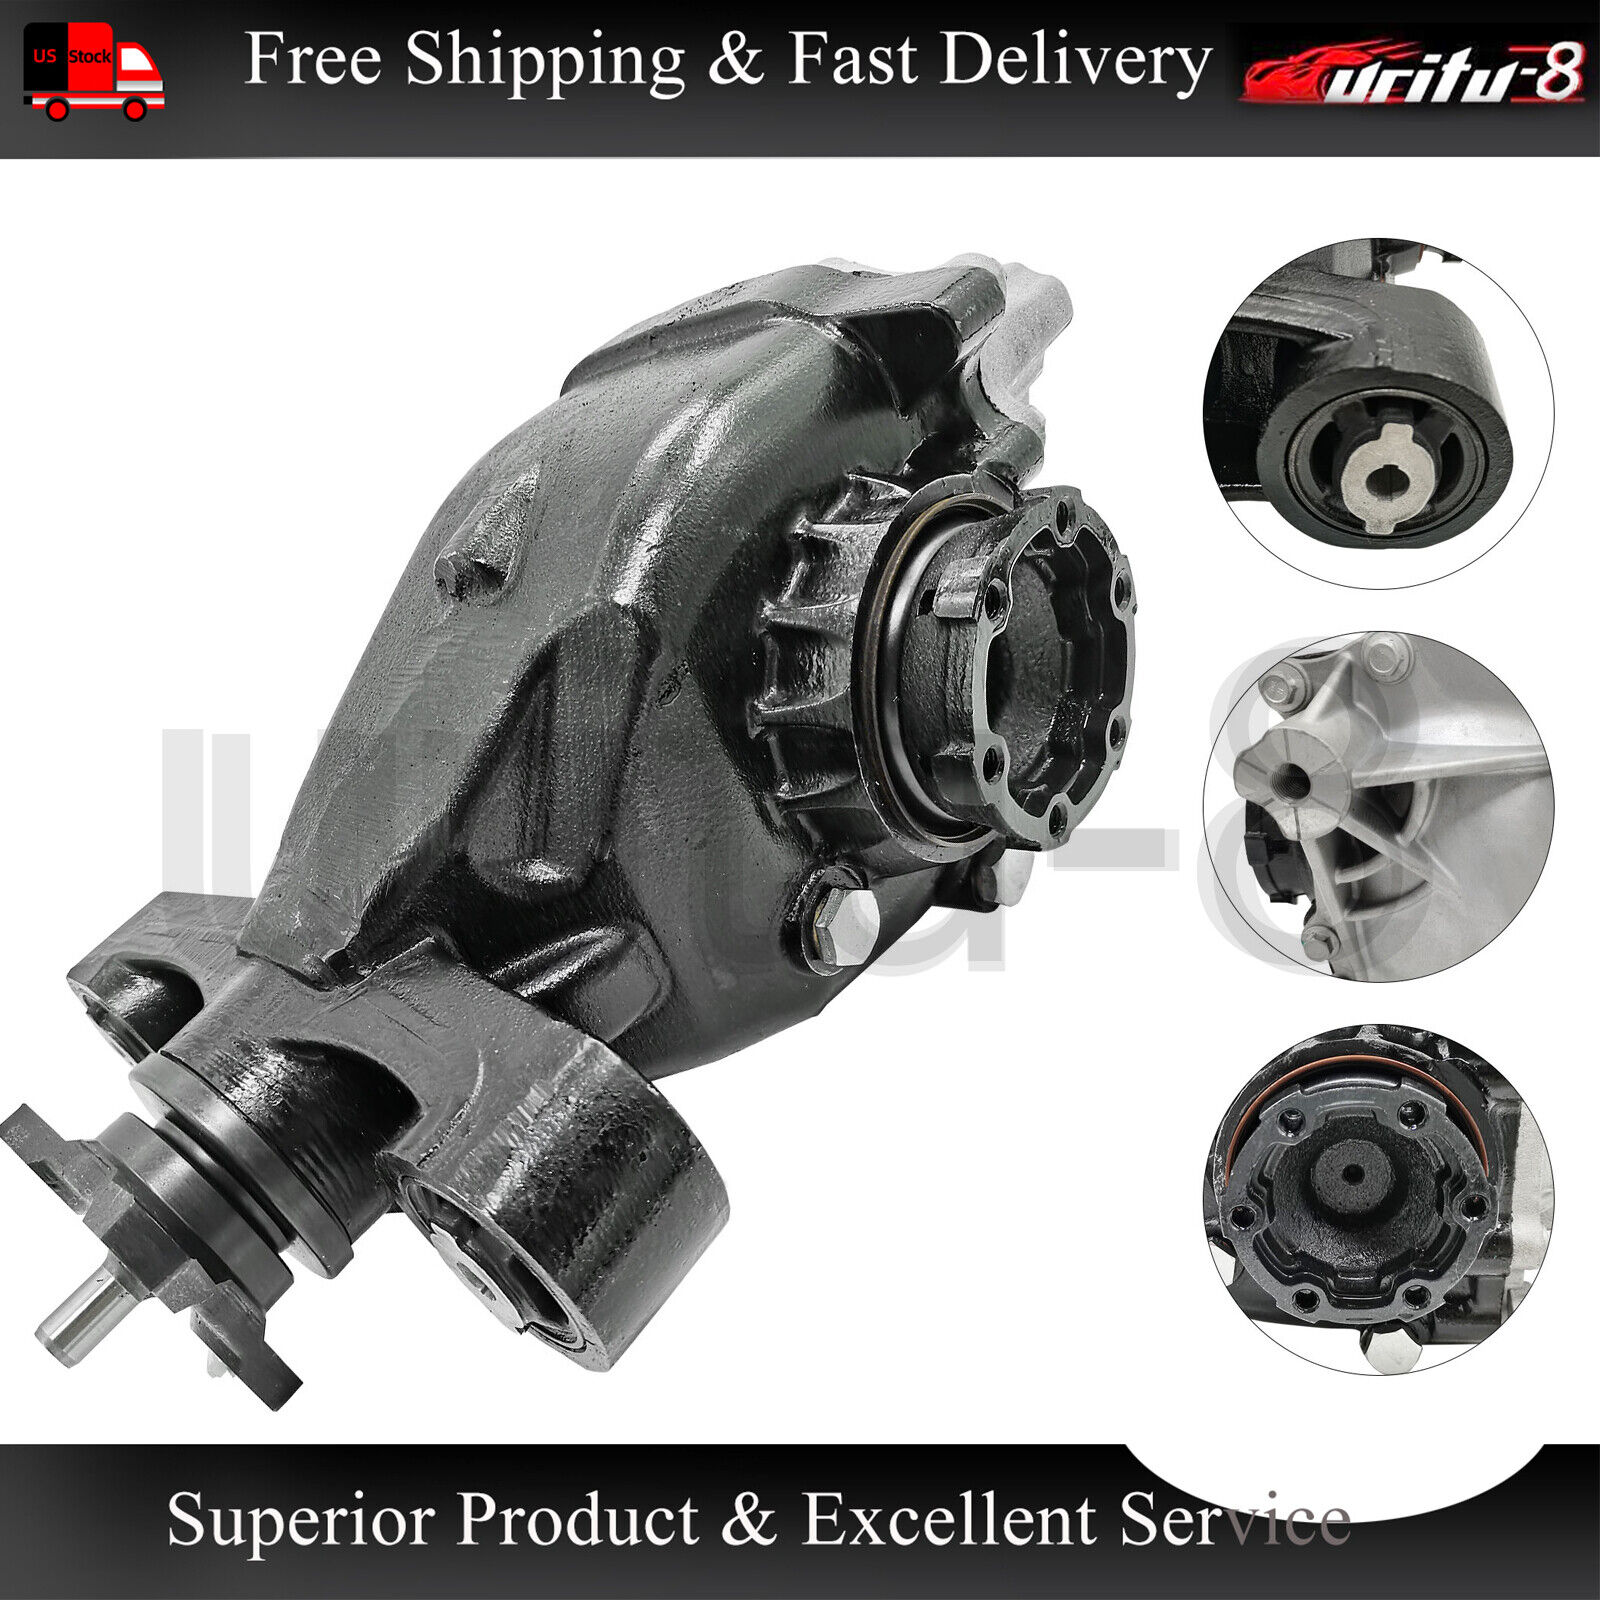 For Cadillac CTS AWD 2015-2019 Rear Differential Ratio 3.27 23156300 84110751 US